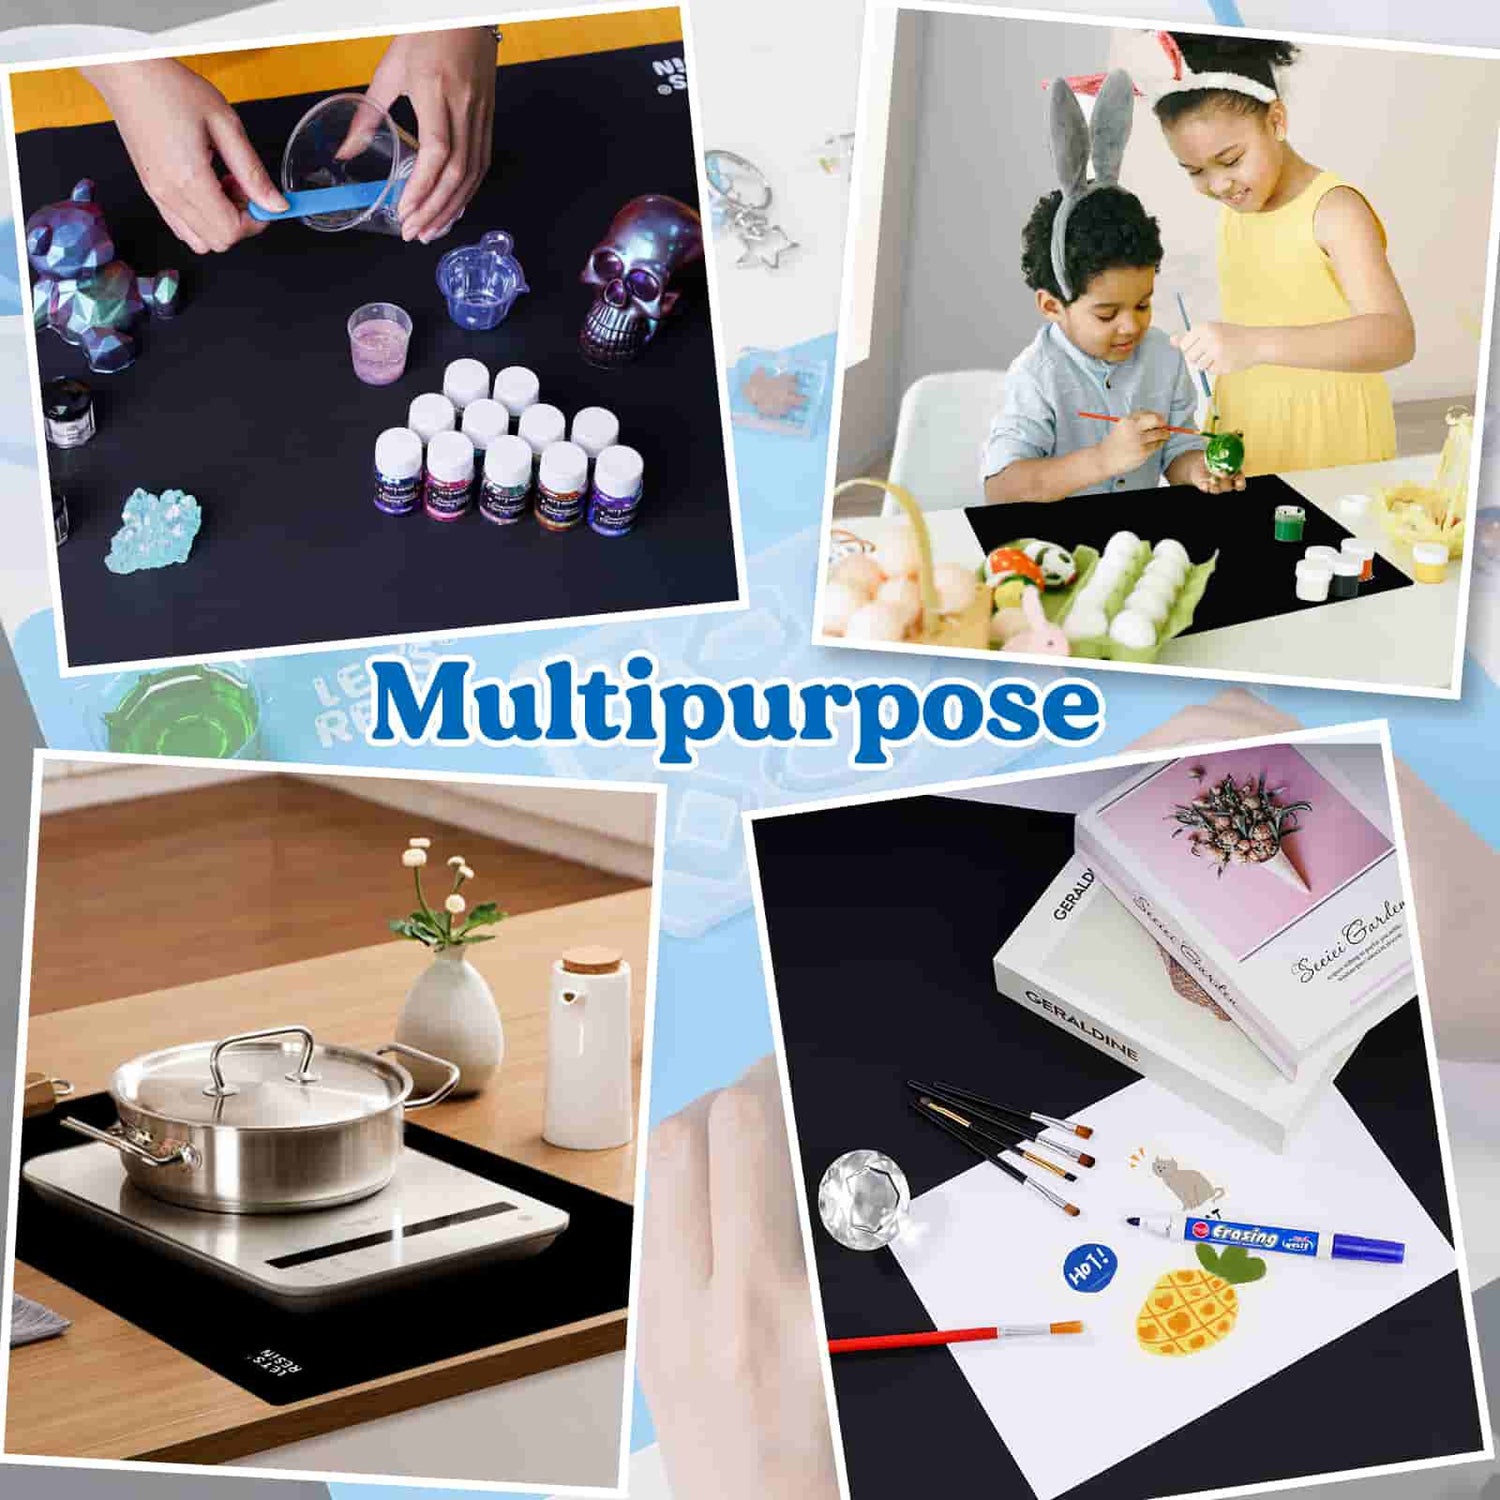 Large Silicone Mat For Crafts Nonslip Nonstick Sheet For Jewelry